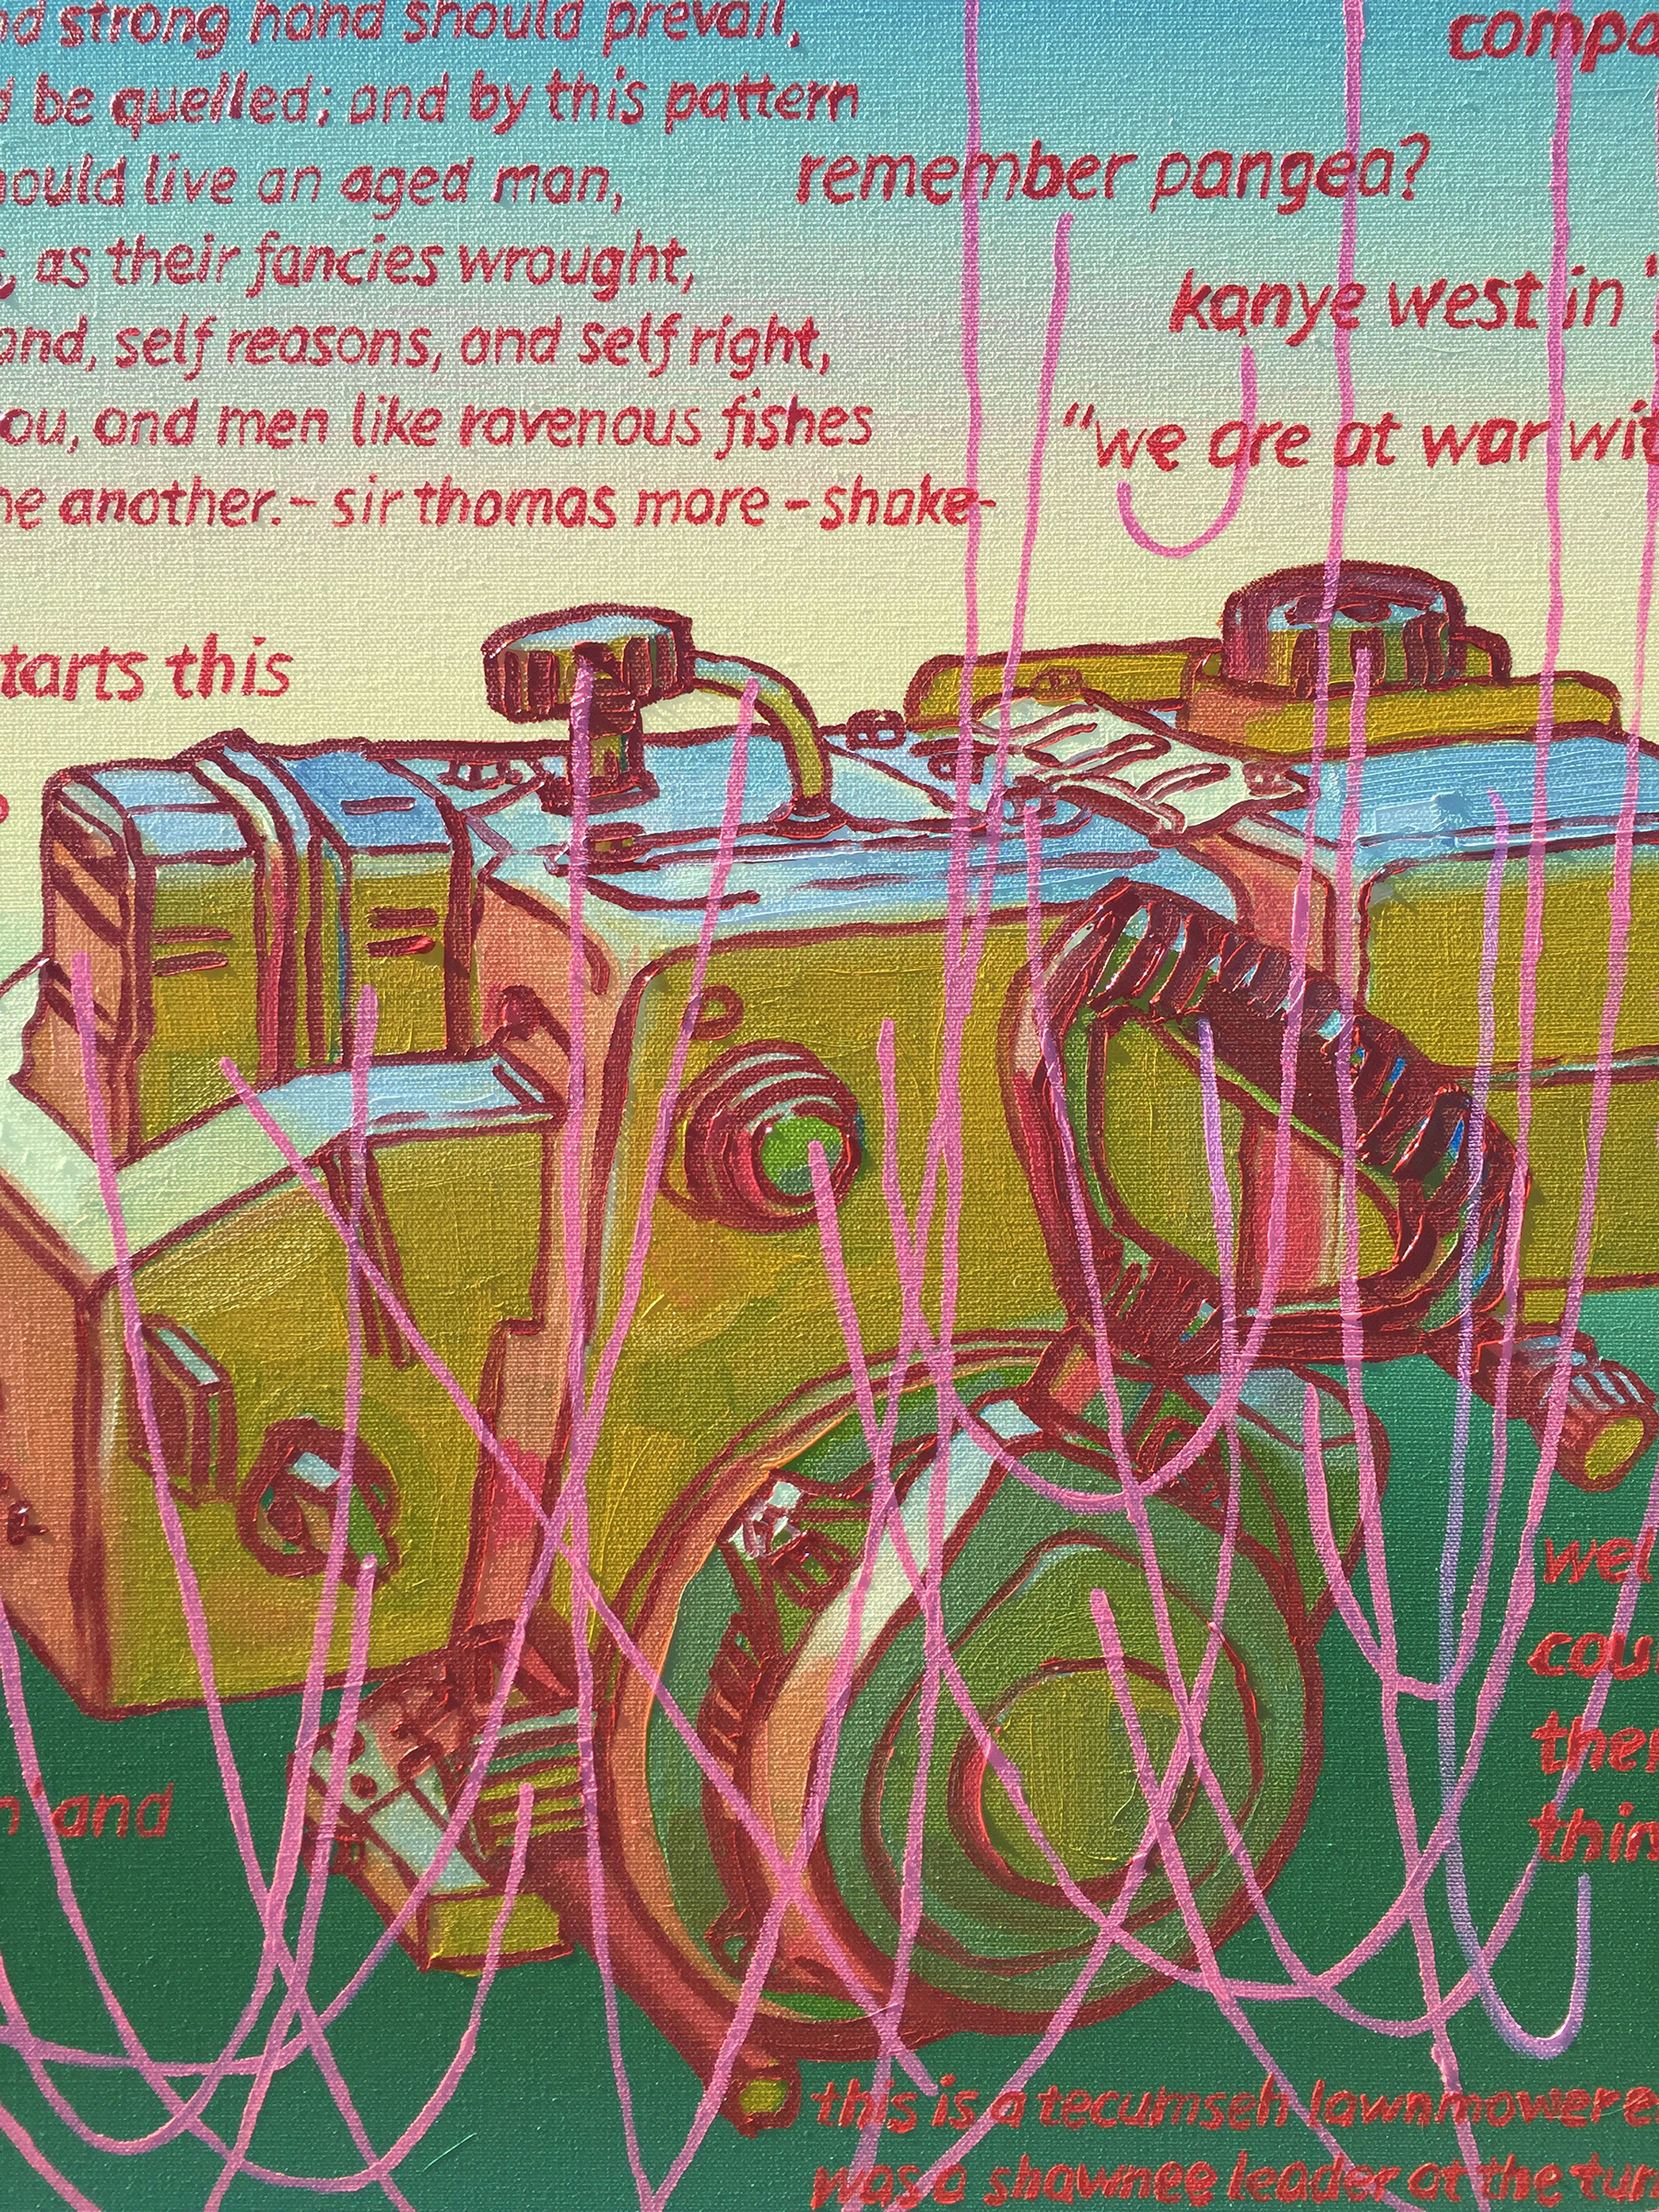 A close-up image showing the details of a painting of a diagram of a lawnmower engine.